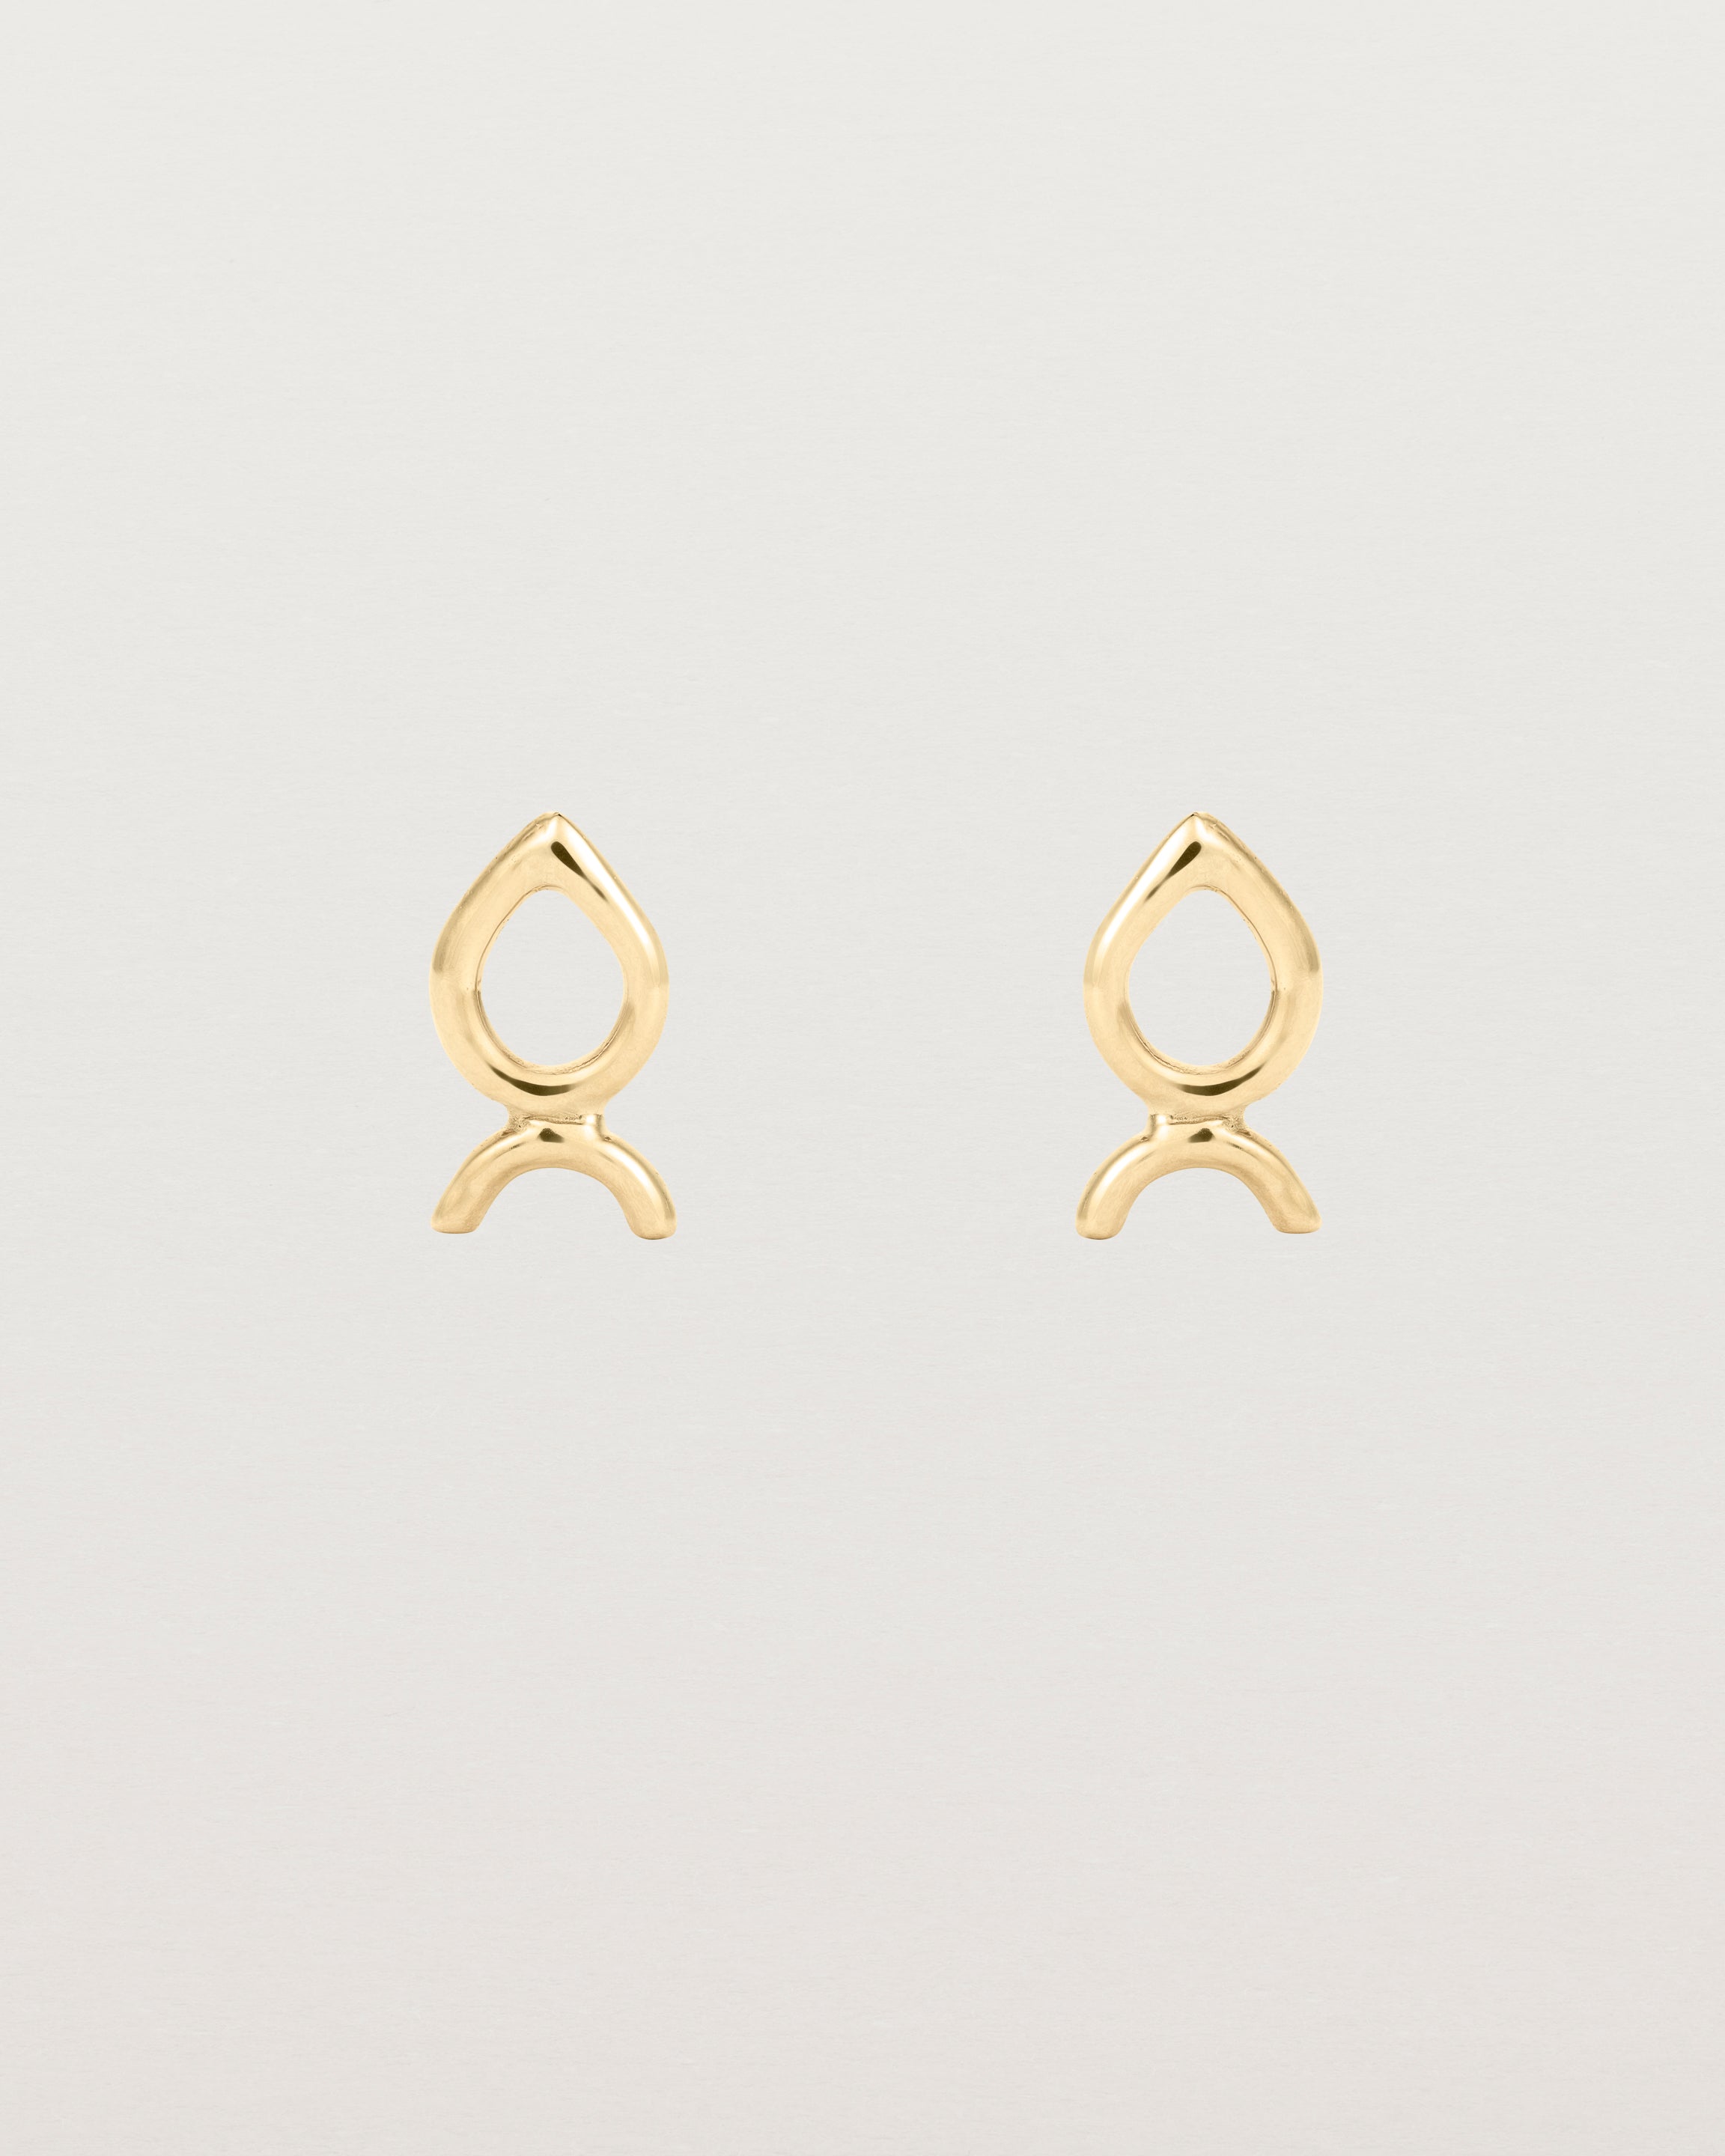 A small pair of yellow gold studs shaped like a tear drop